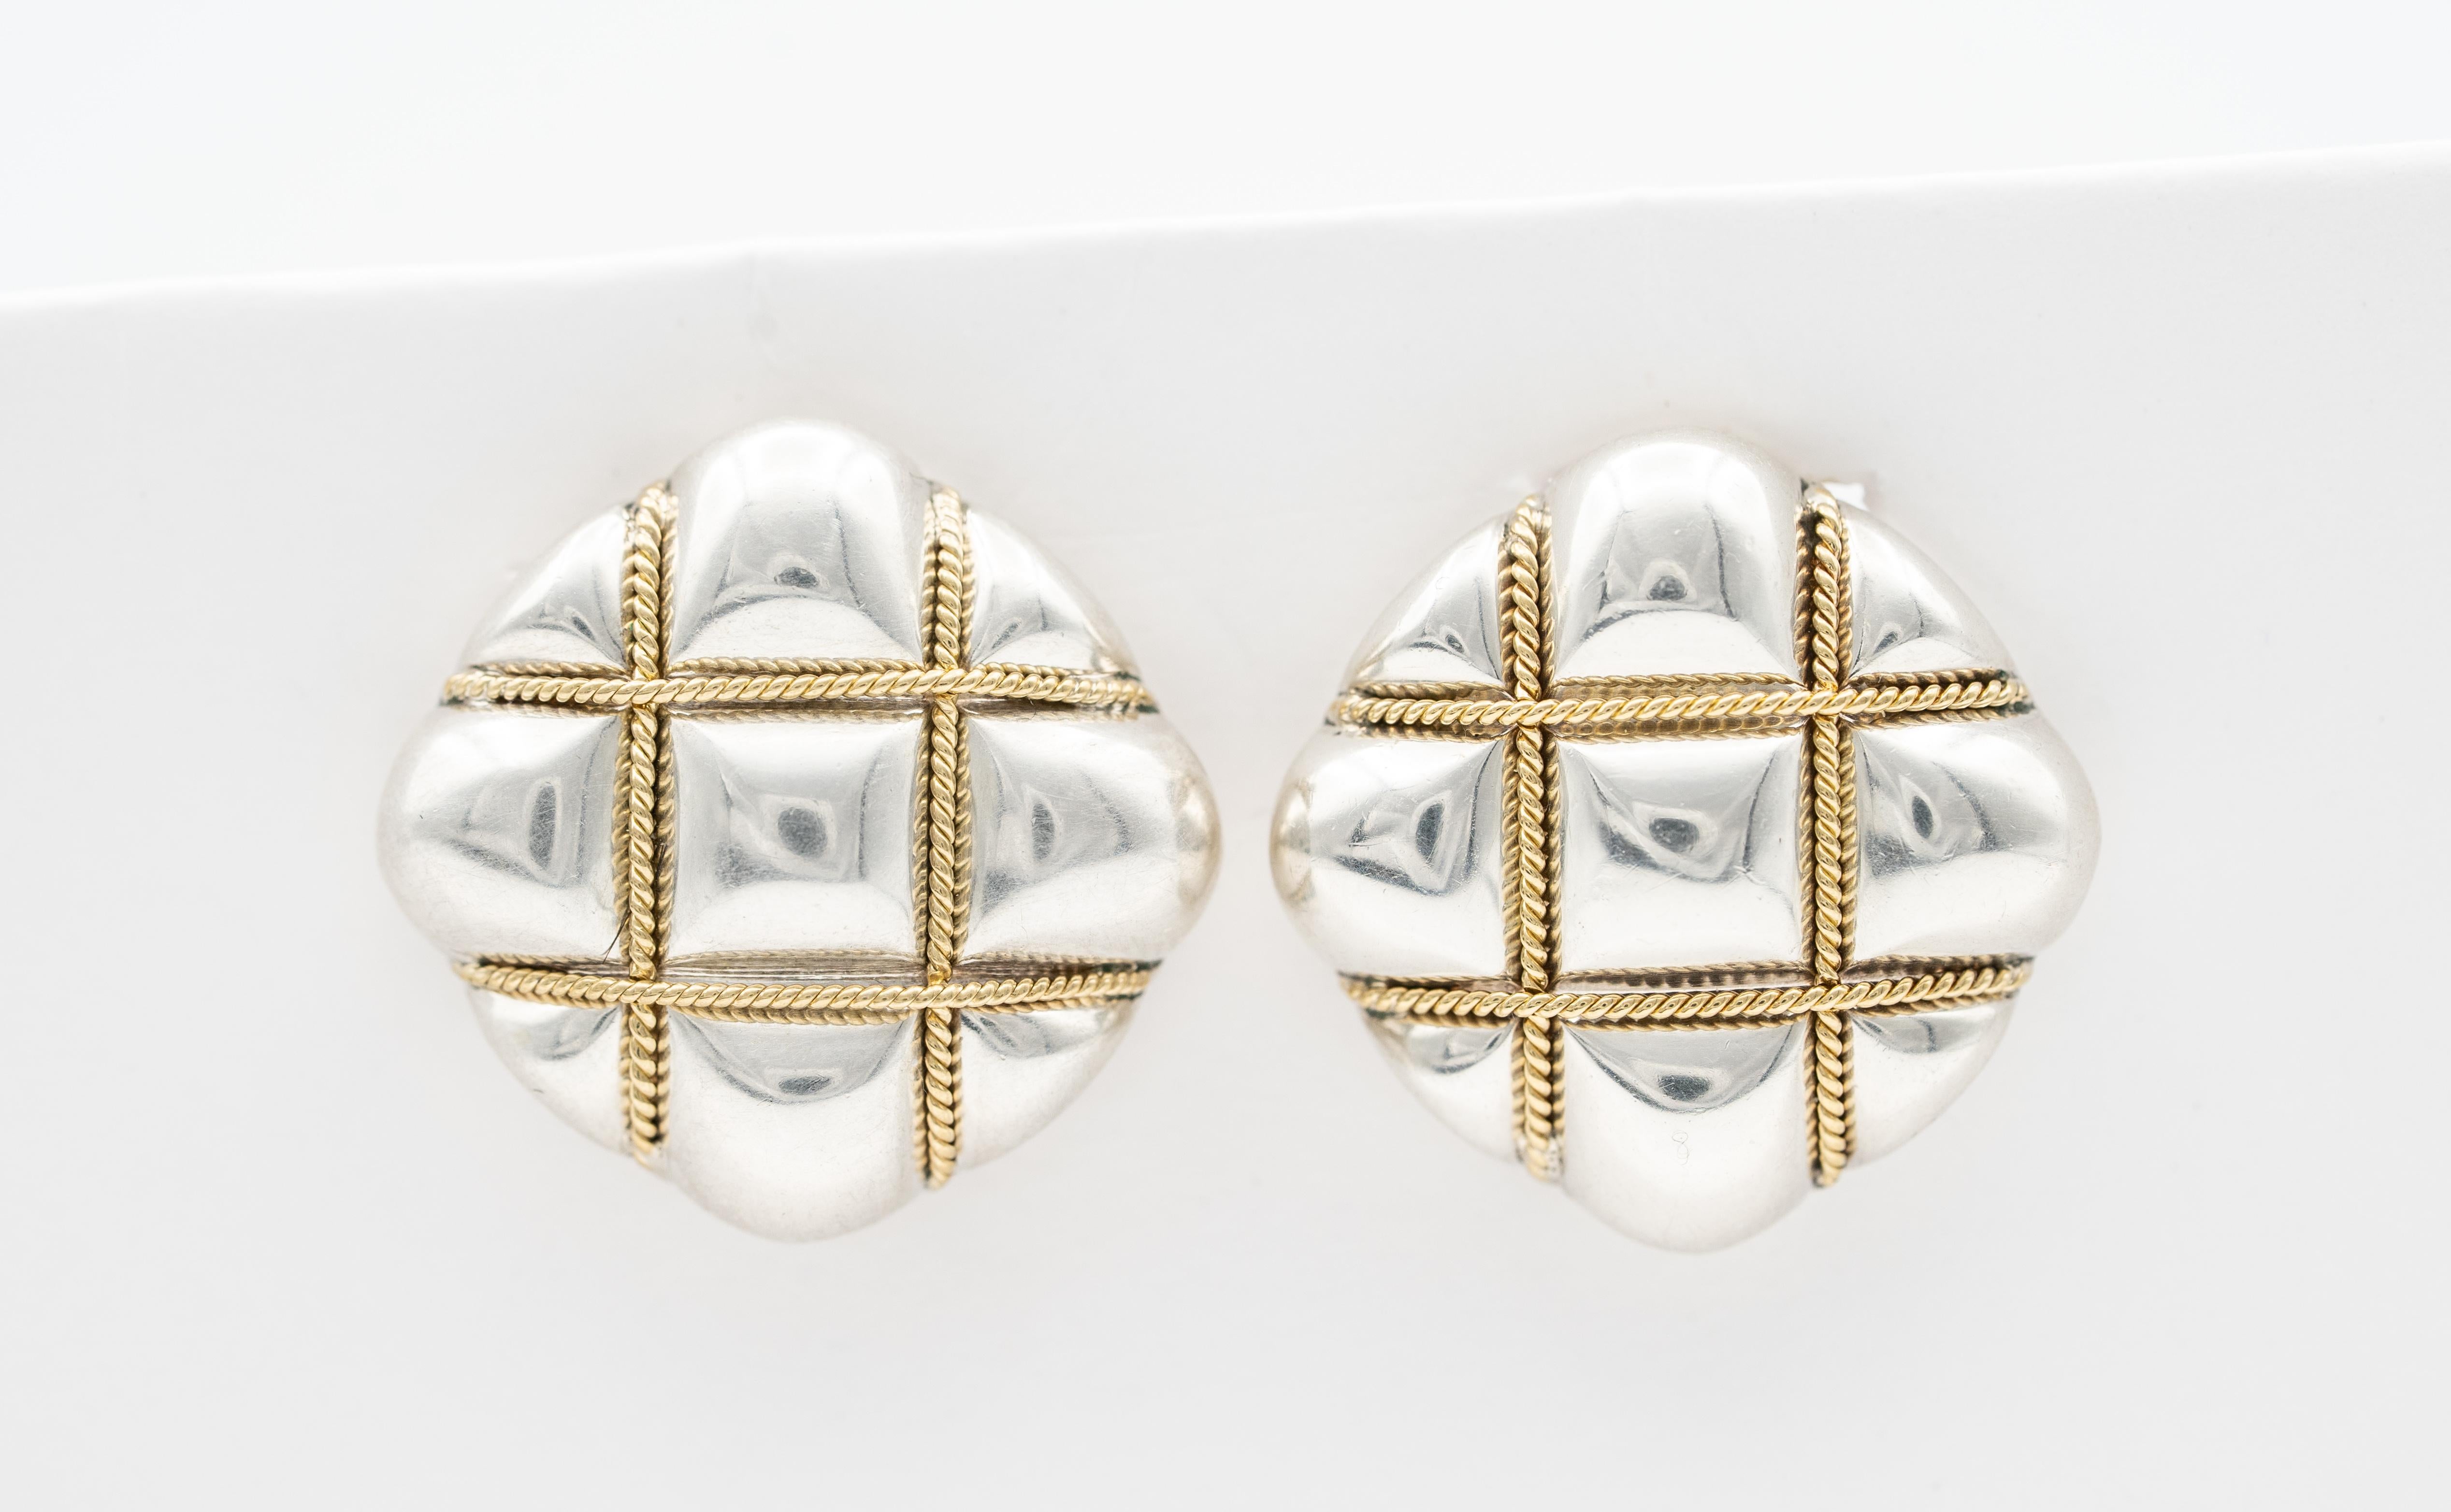 Pair of genuine Tiffany & Co. quilted earrings finely crafted in Sterling silver and 18 Karat yellow gold twisted wire details. Clip on backs.

Measurements : 1.25